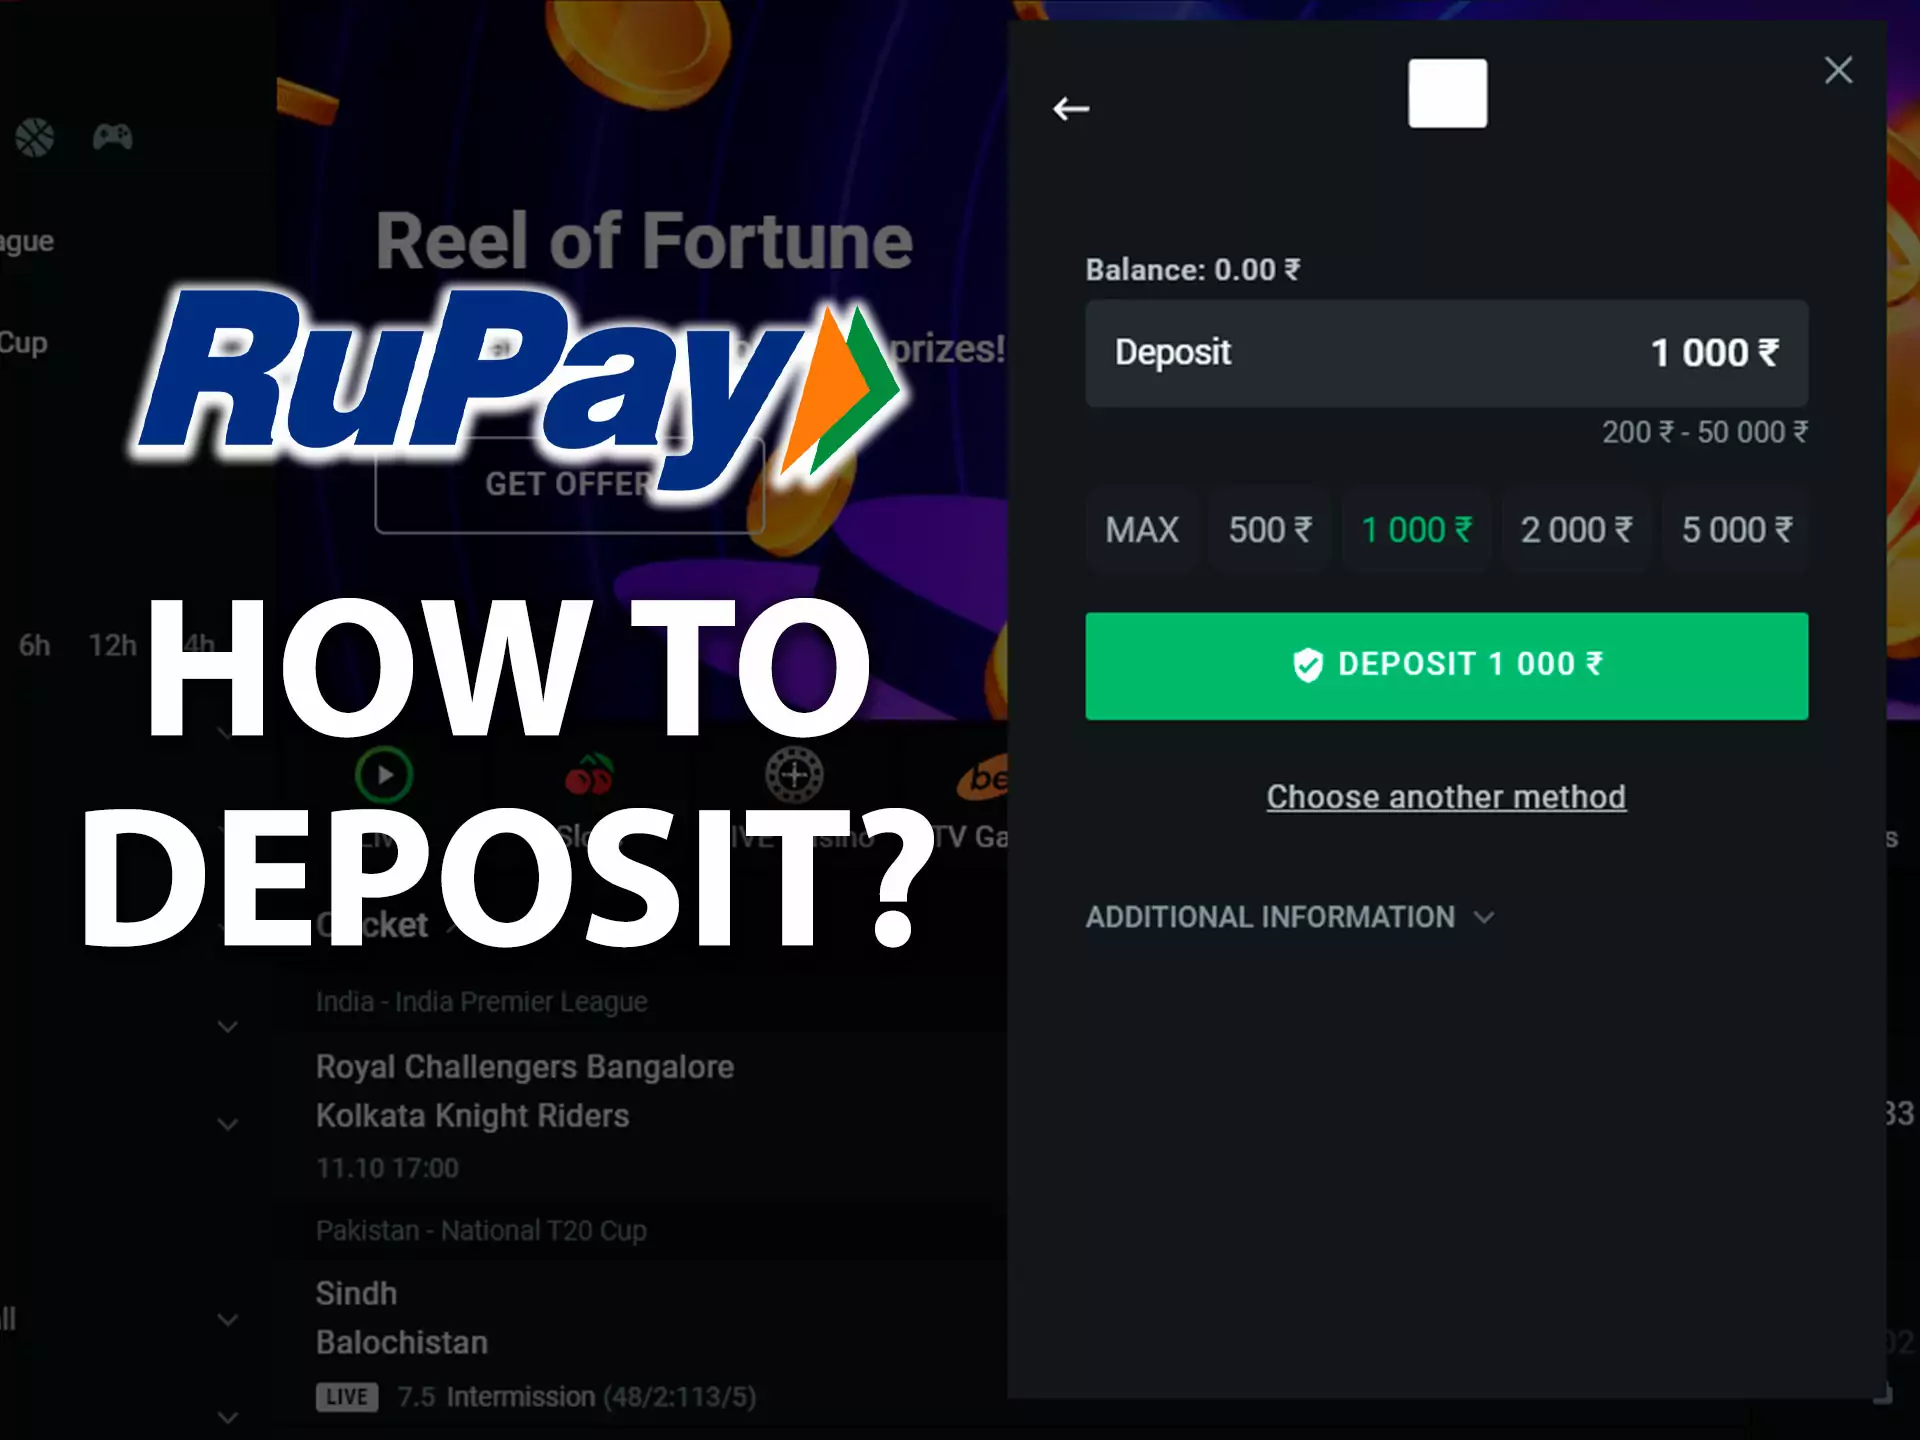 RuPay allows instant deposits to the betting sites.